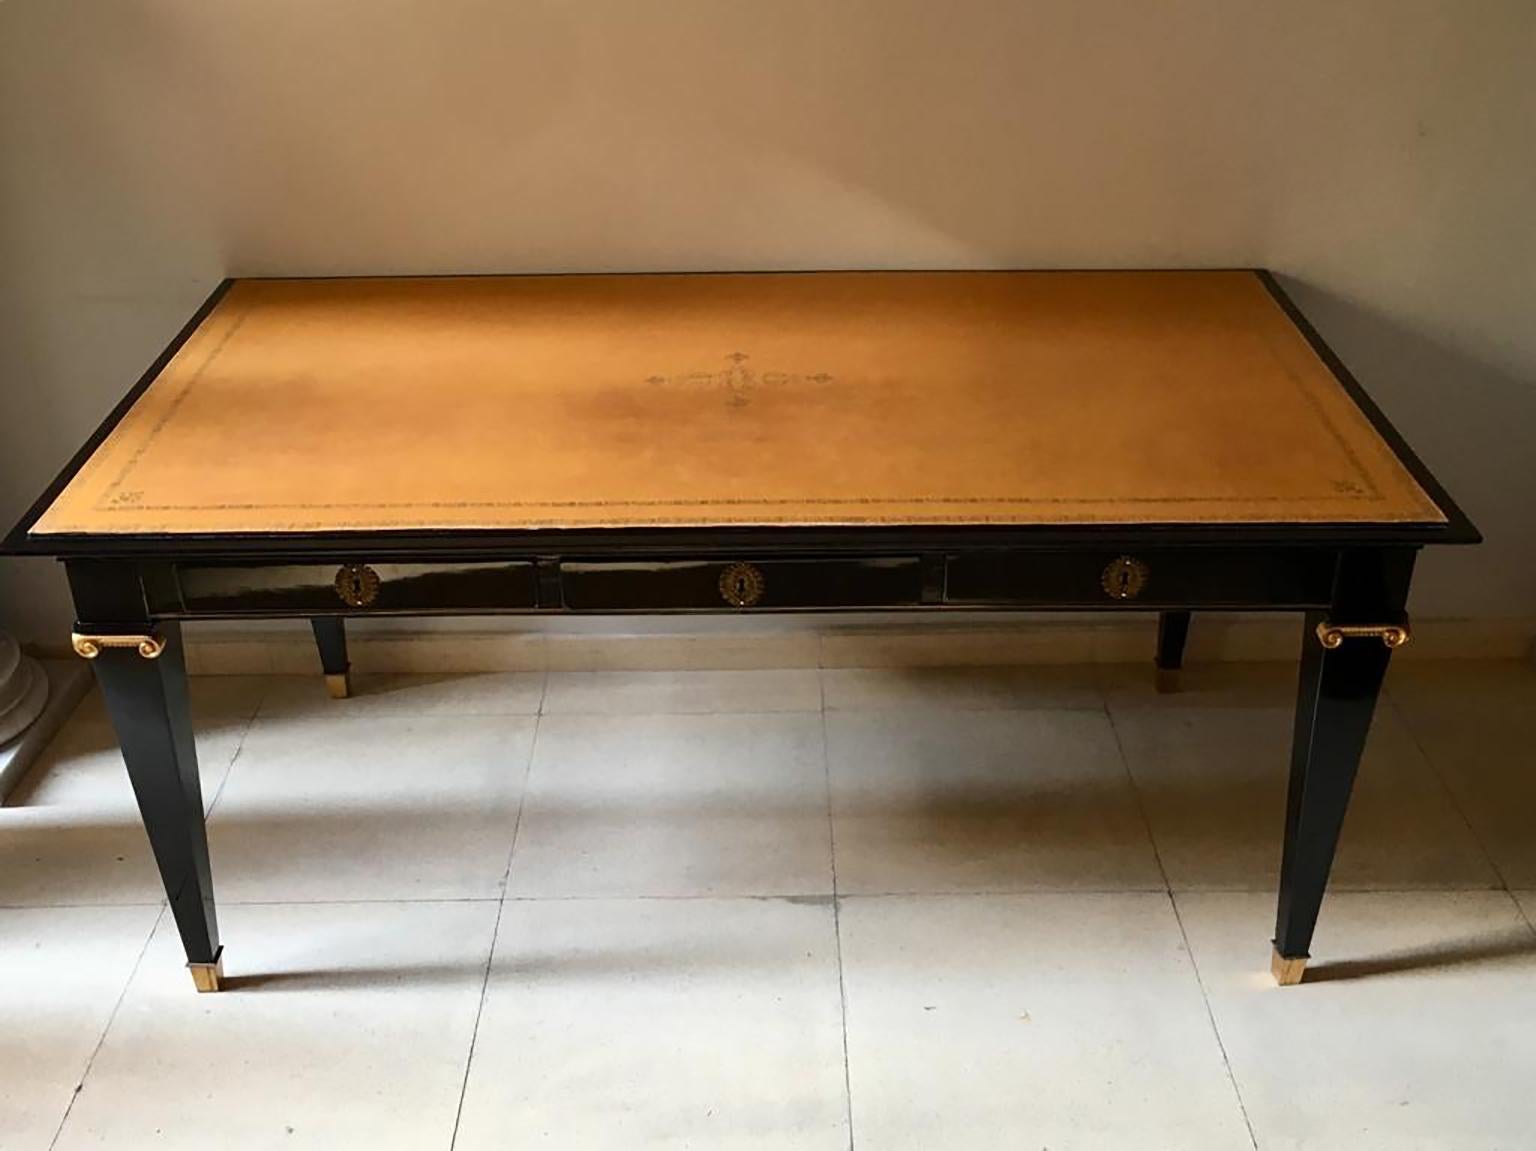 French desk table in Andre Arbus style, black lacquered wood, with jonic gold bronzes and sabot-finished legs, three drawers and leather cover with gold filigree.